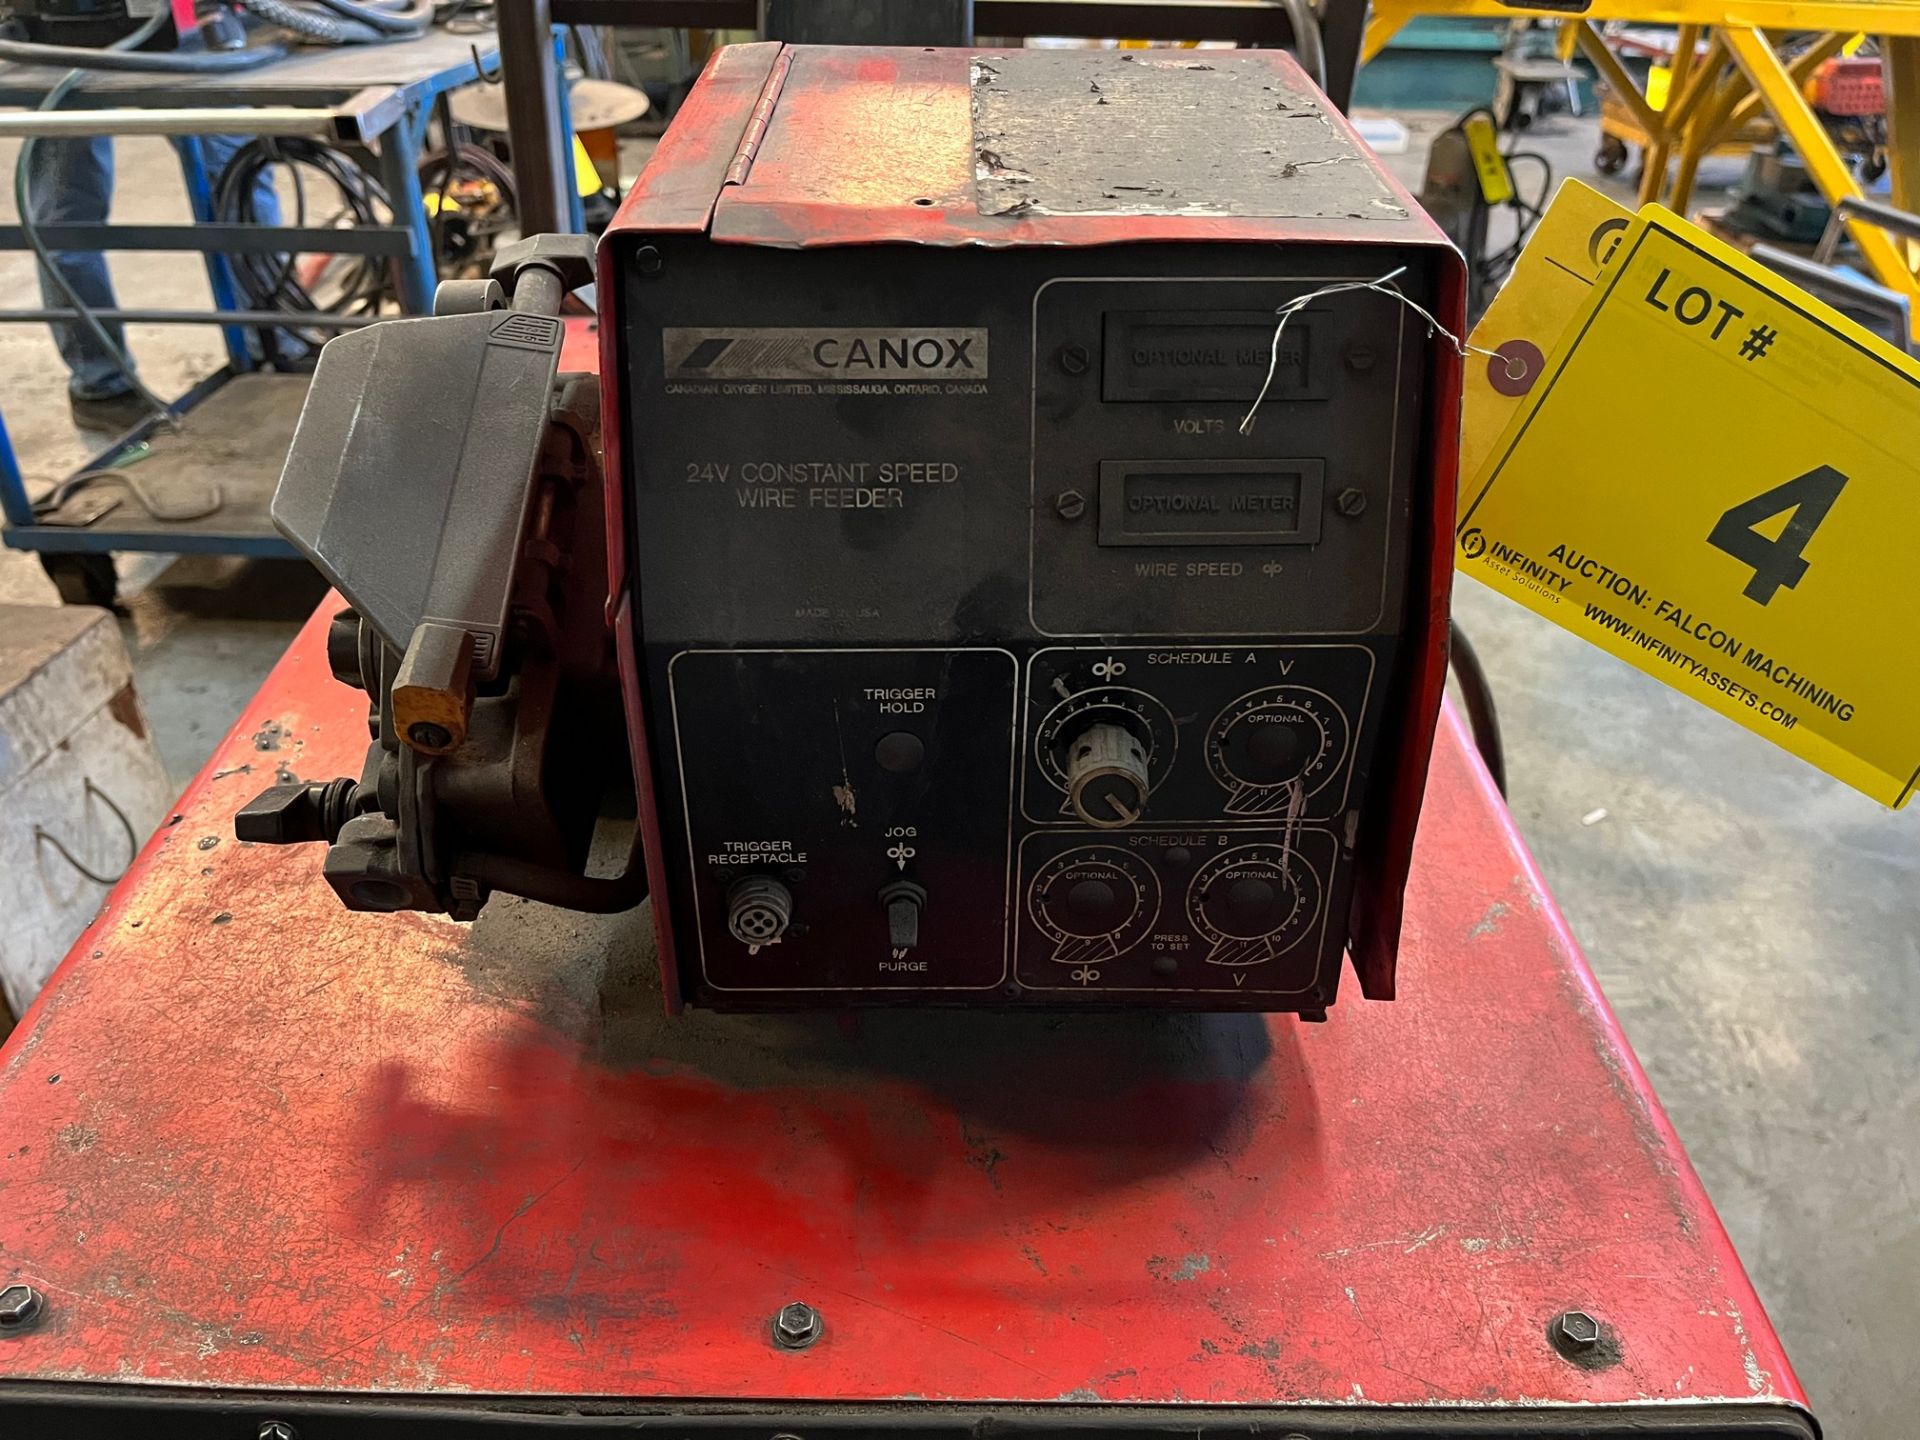 CANOX C-DW 452 WELDER W/ CANOX 24V CONSTANT SPEED WIRE FEEDER AND CART - Image 4 of 5